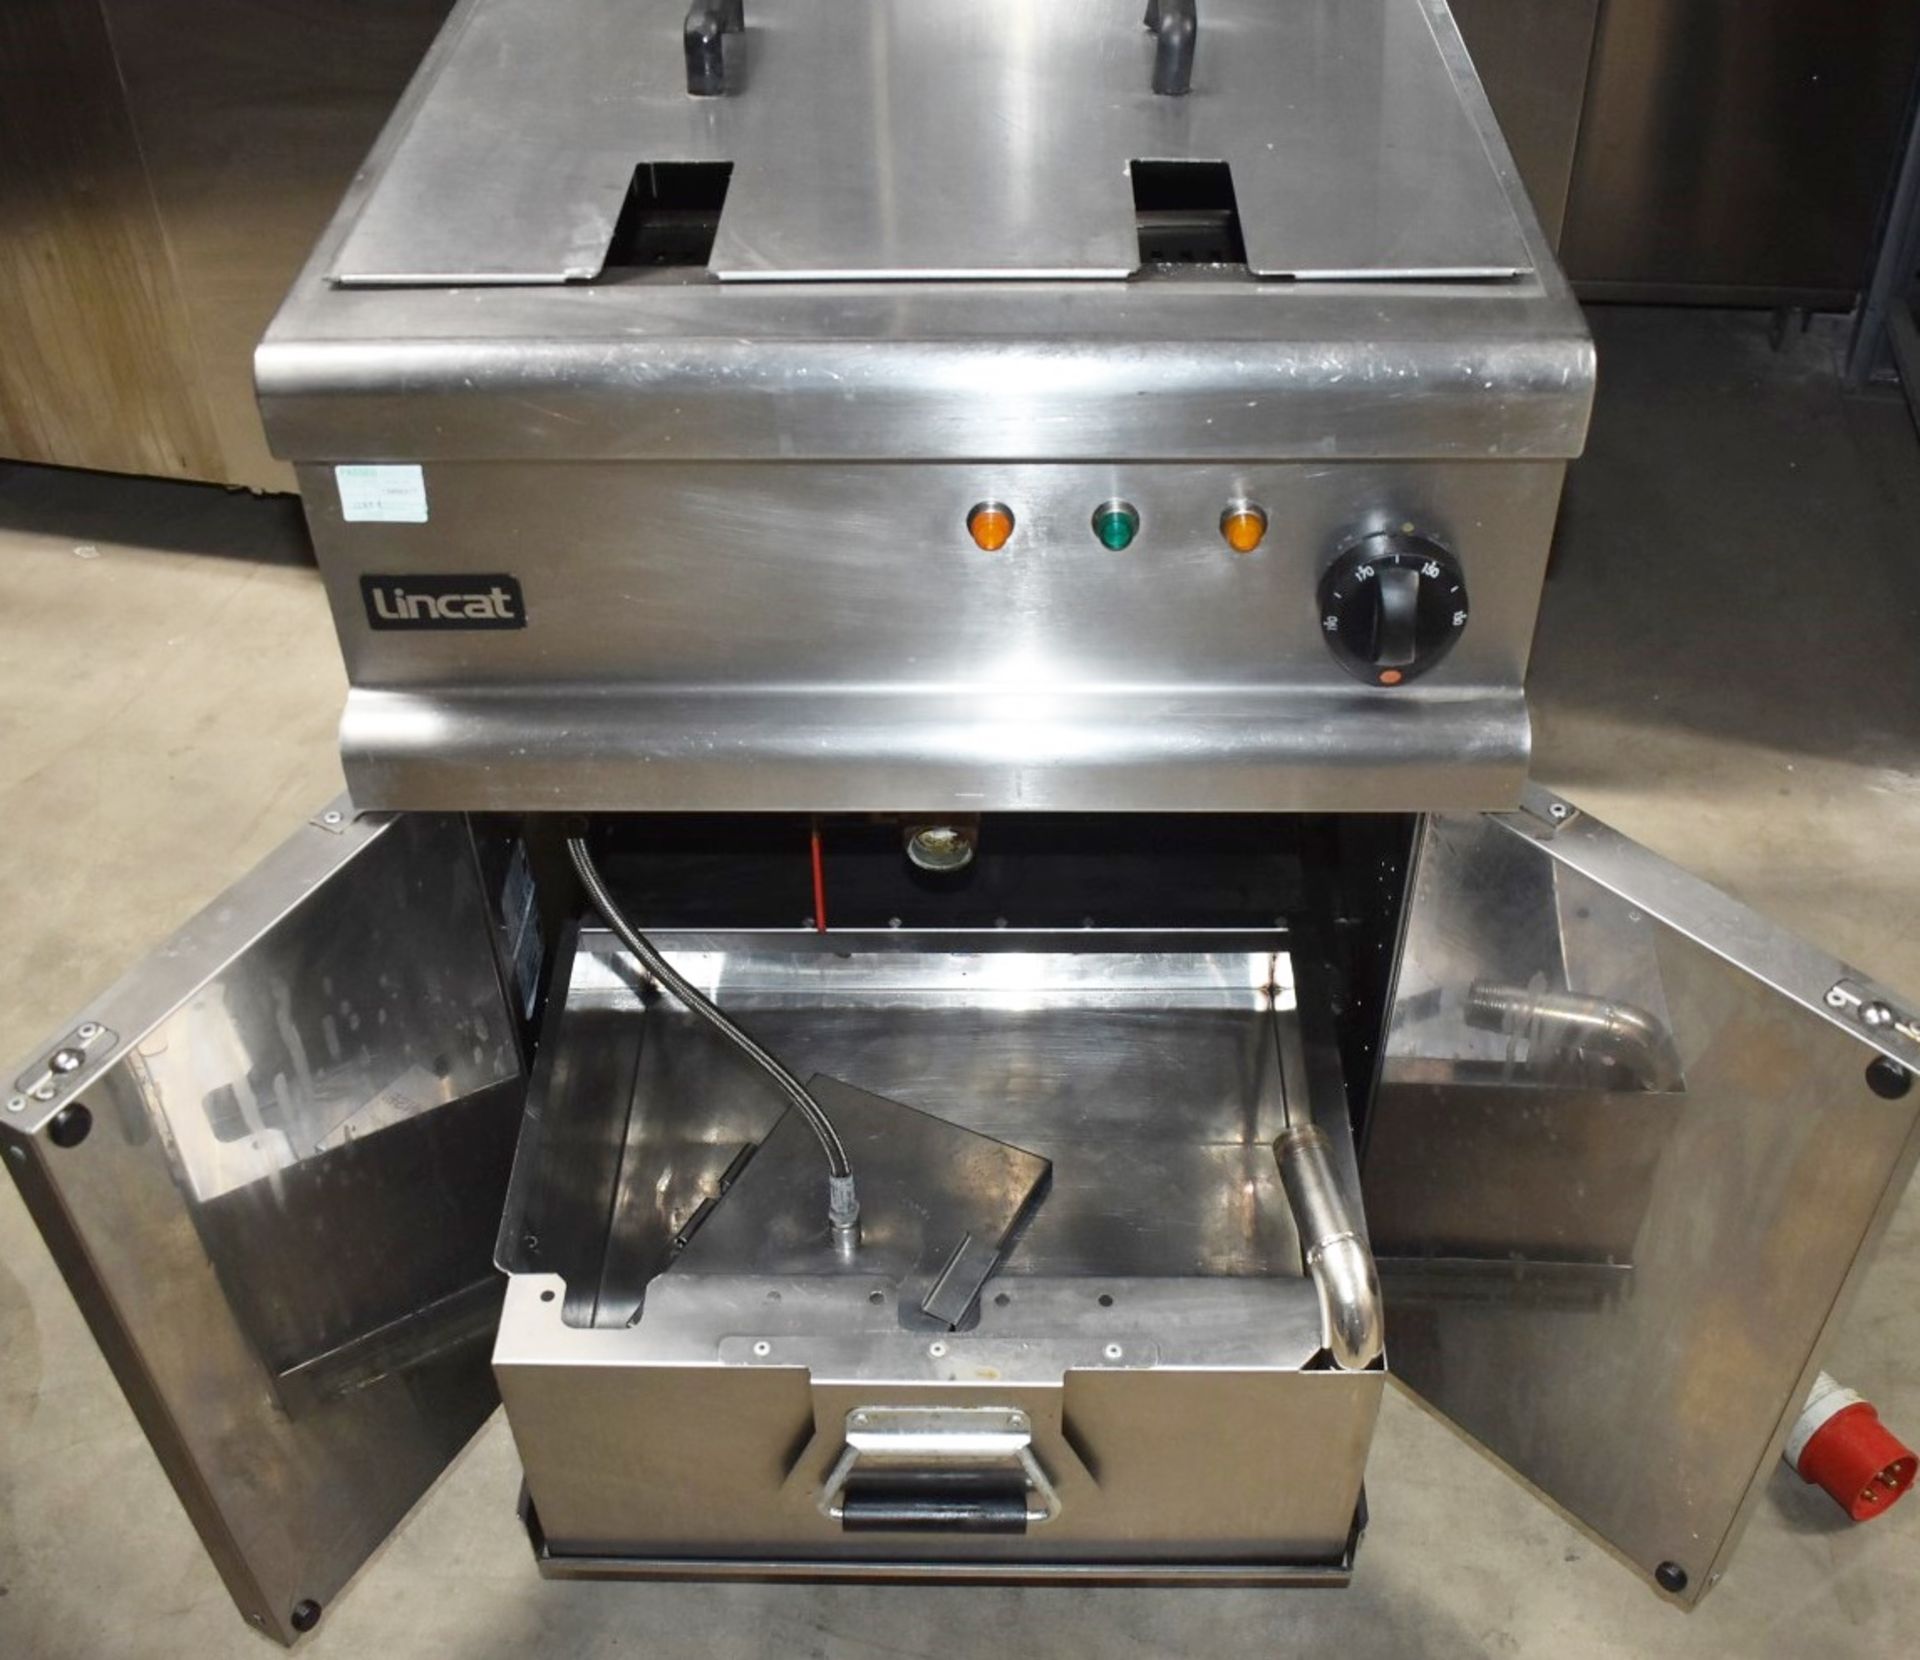 1 x Lincat Opus 700 Single Tank Electric Fryer With Built In Filtration - 3 Phase - Approx RRP £3000 - Image 14 of 15